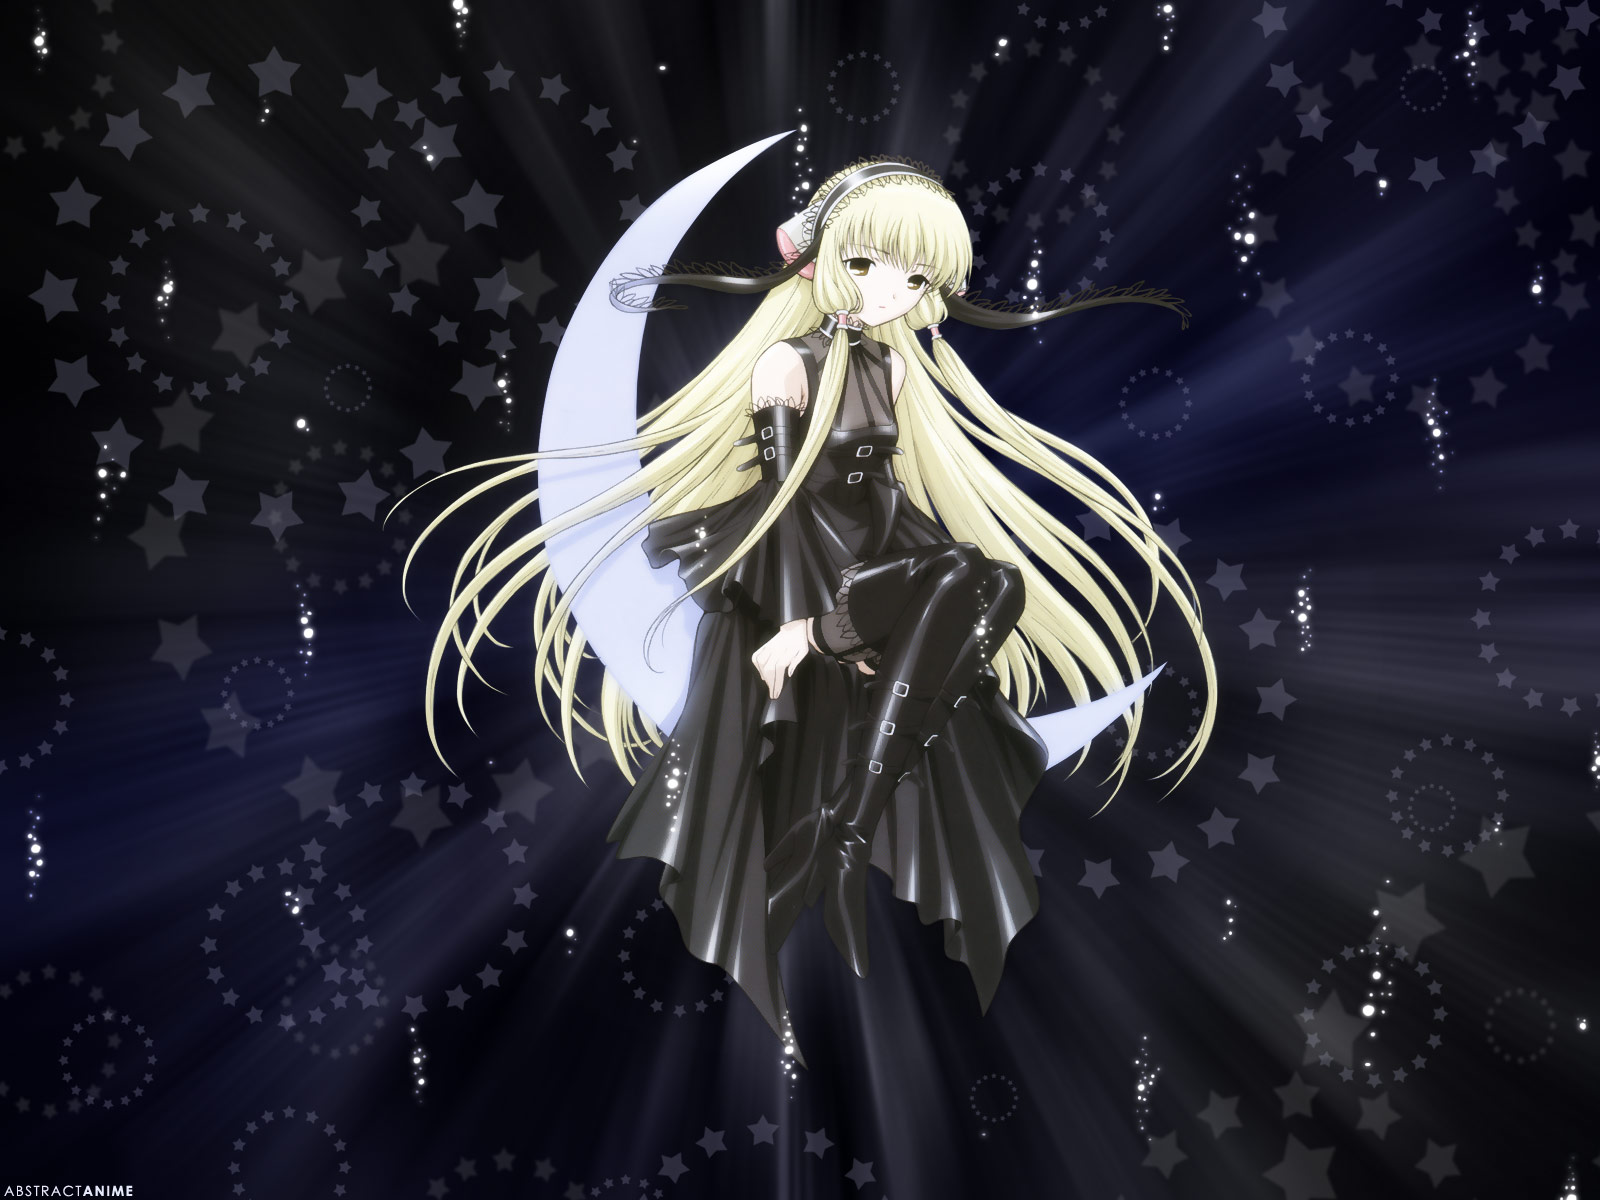 Chobits character in anime wallpaper.